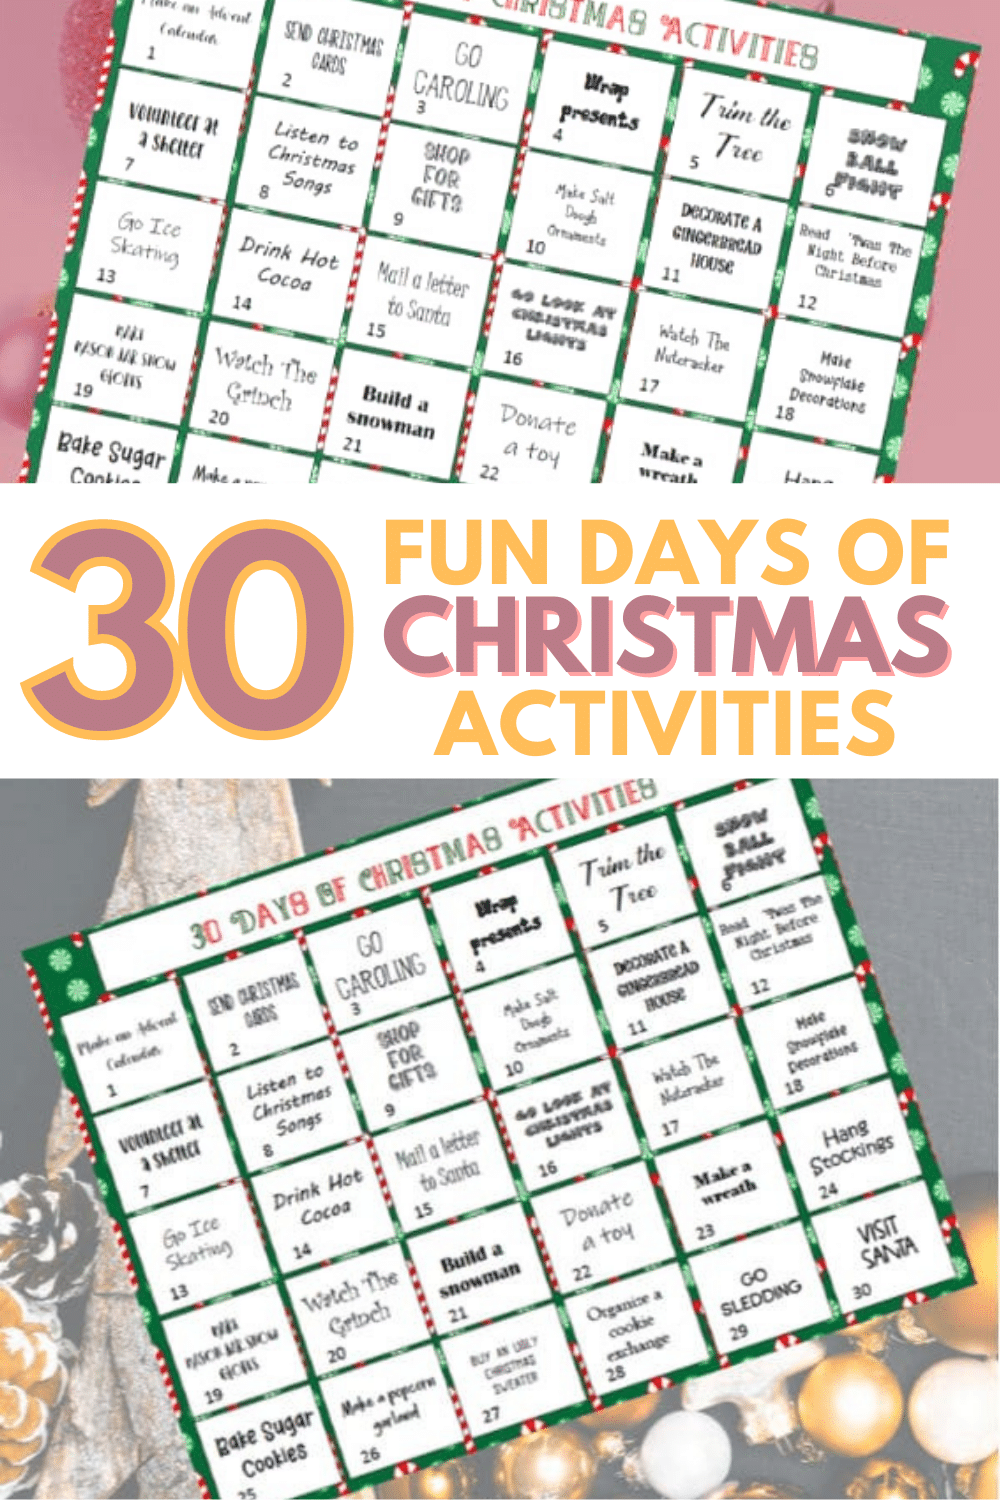 This 30 Days of Family Christmas Activities printable will help keep you on track to have the best holiday season making memories with your family. #printables #christmas #familyactivities via @wondermomwannab